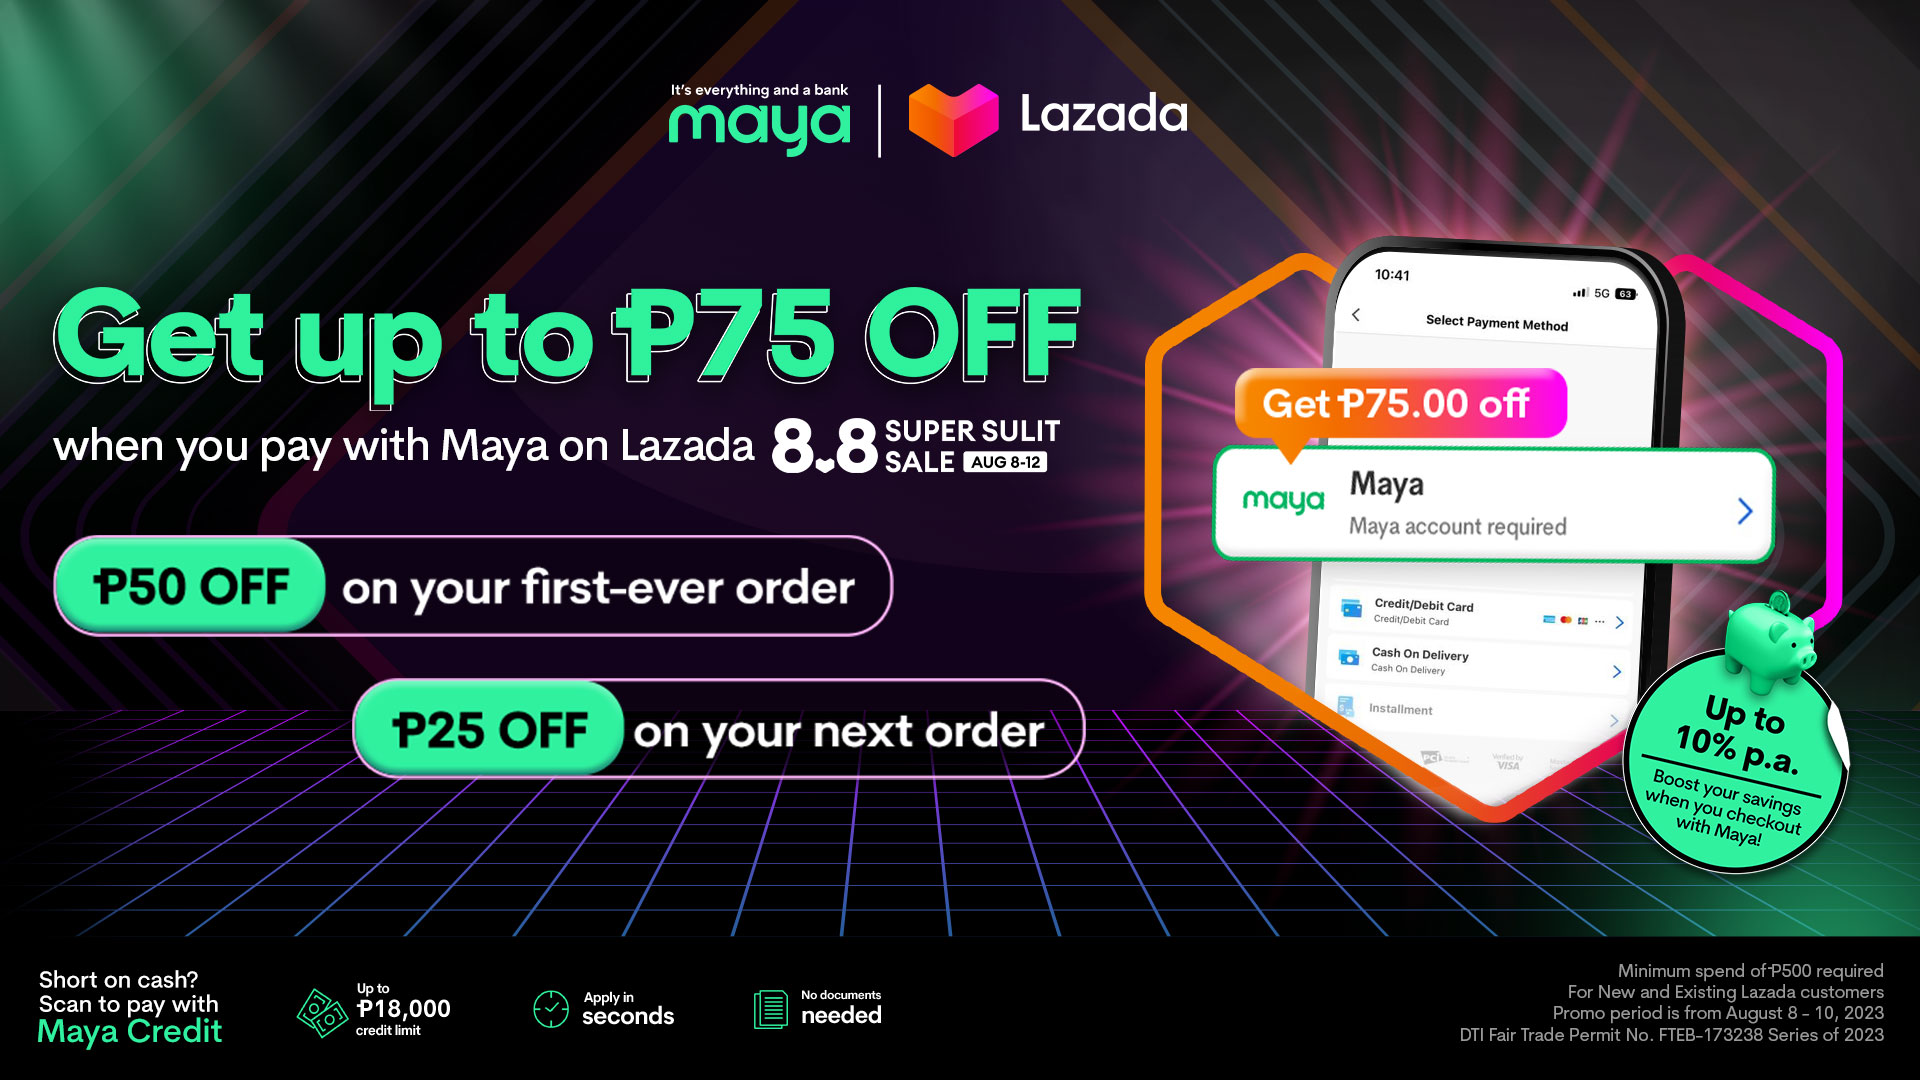 Get up to P75 on Lazada 8.8 with Maya!